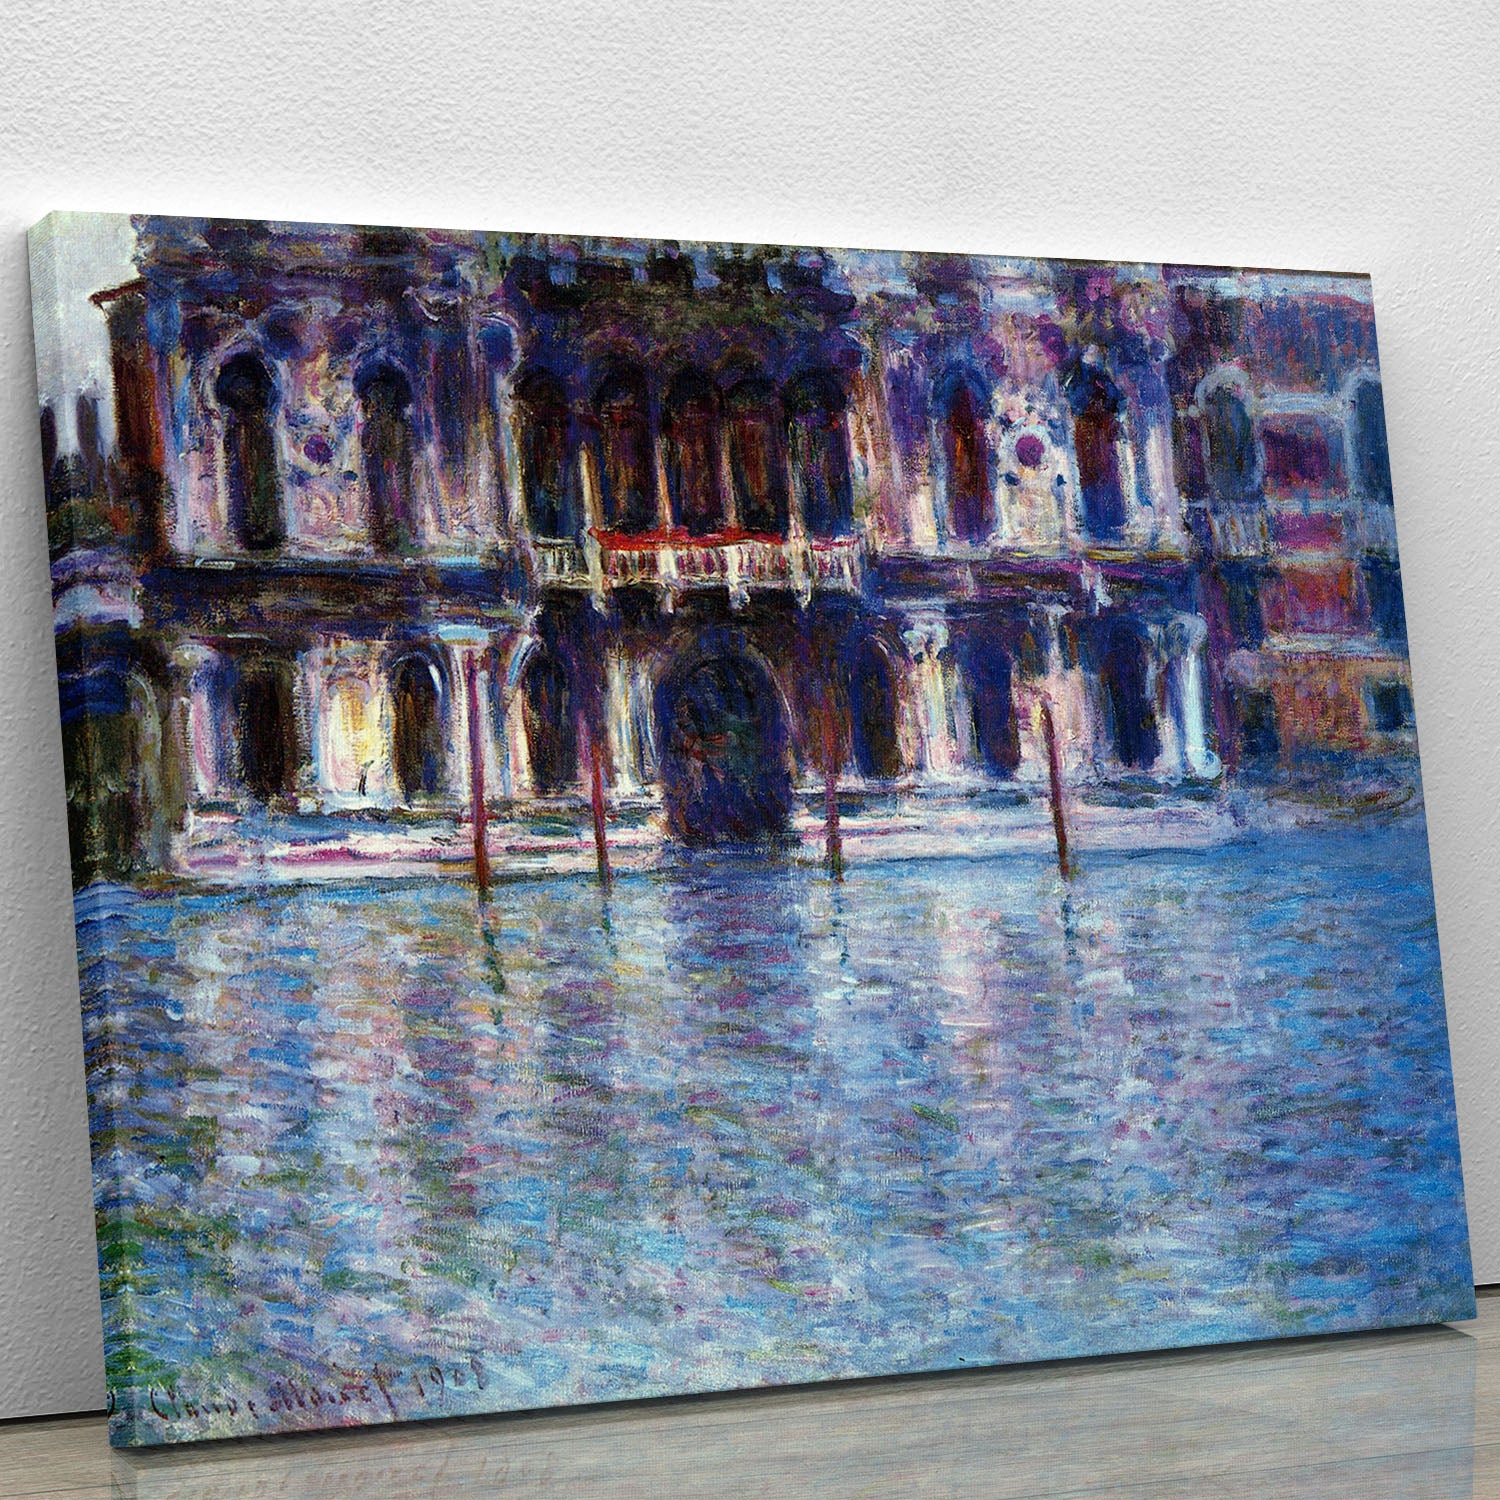 Palazzo 2 by Monet Canvas Print or Poster - Canvas Art Rocks - 1